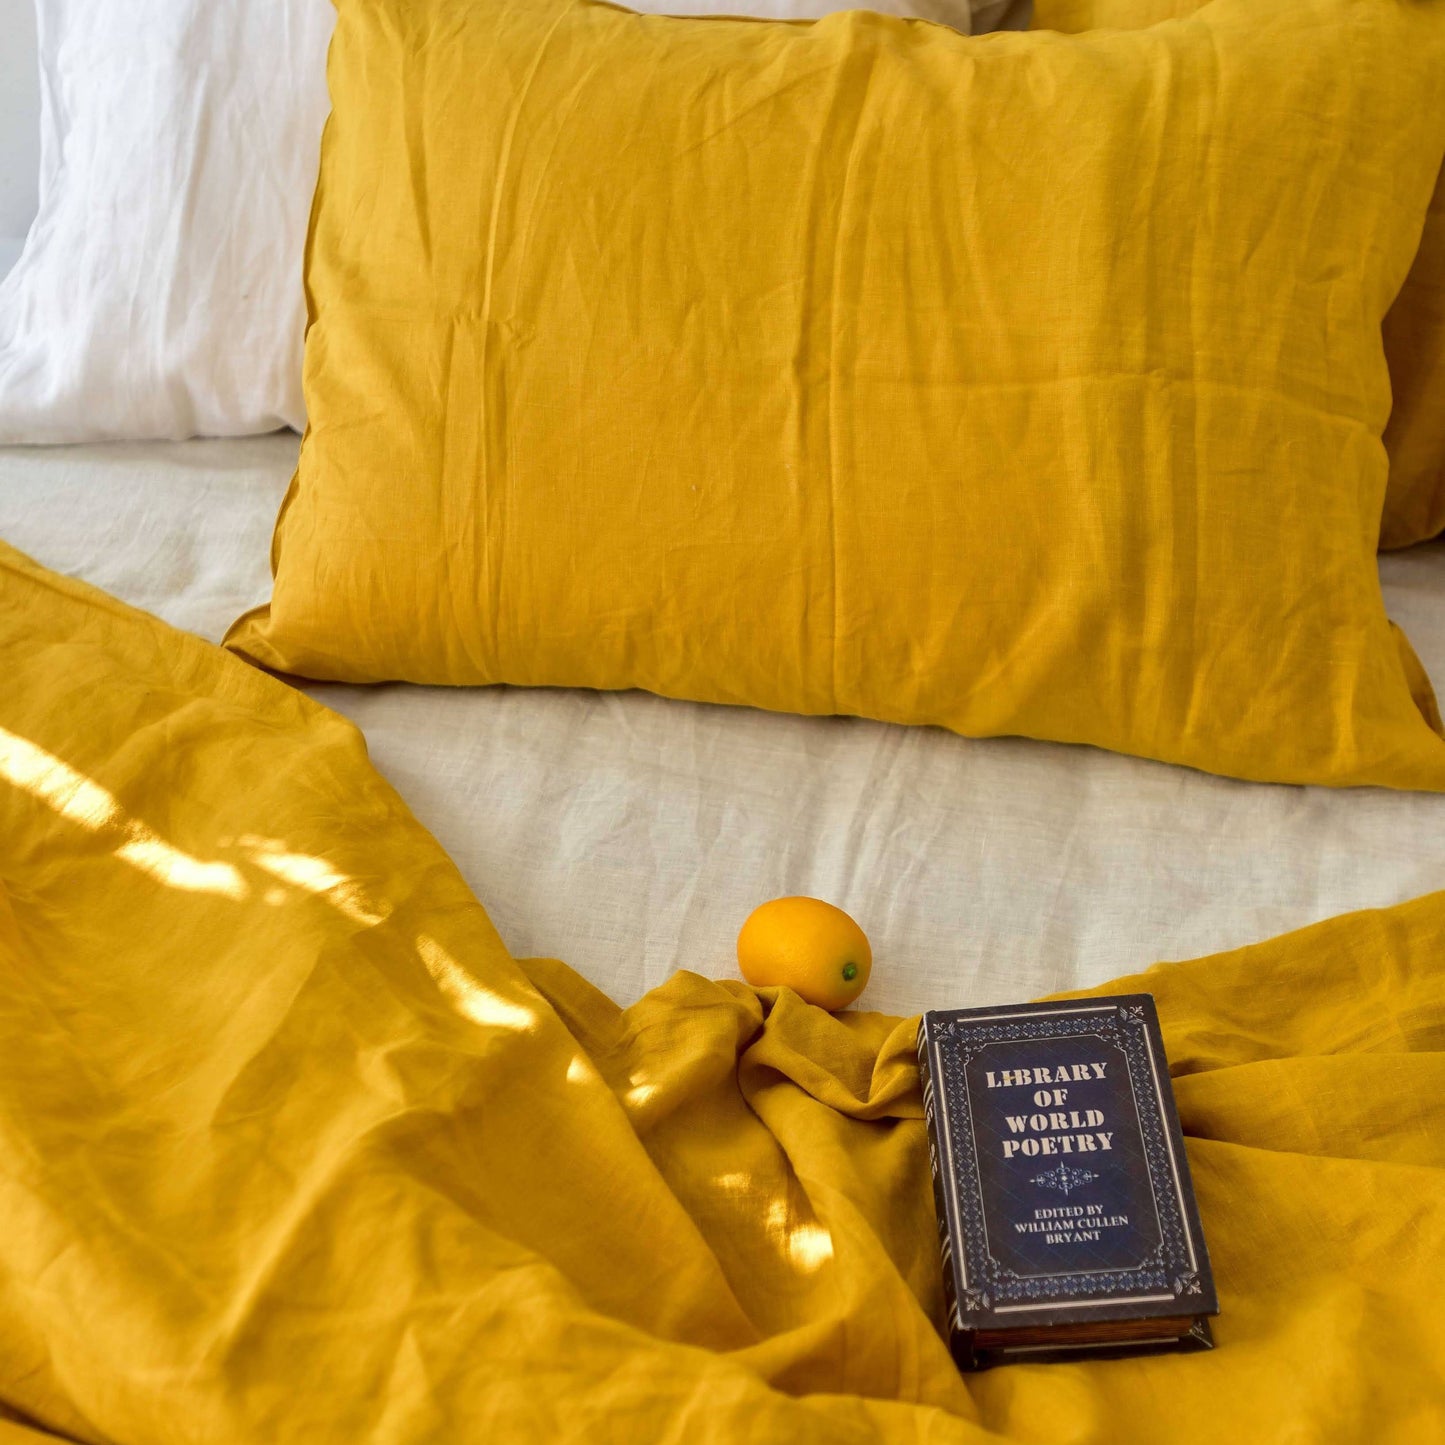 Yellow French Linen Bedding Sets (4 pieces) - Plain Dyeing